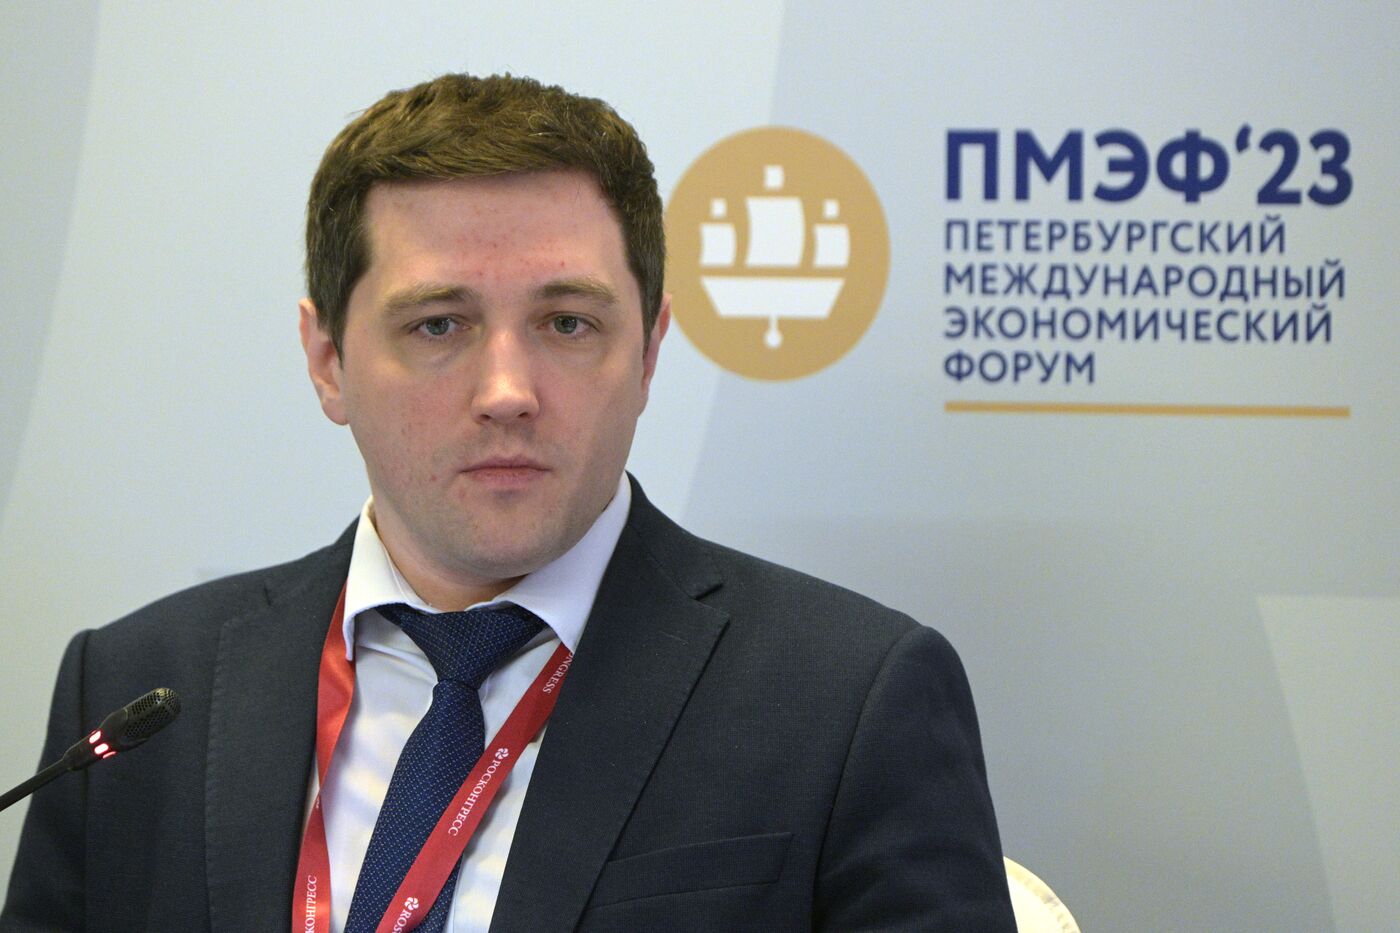 SPIEF-2023. Statistics in the Service of Society: Present and Future